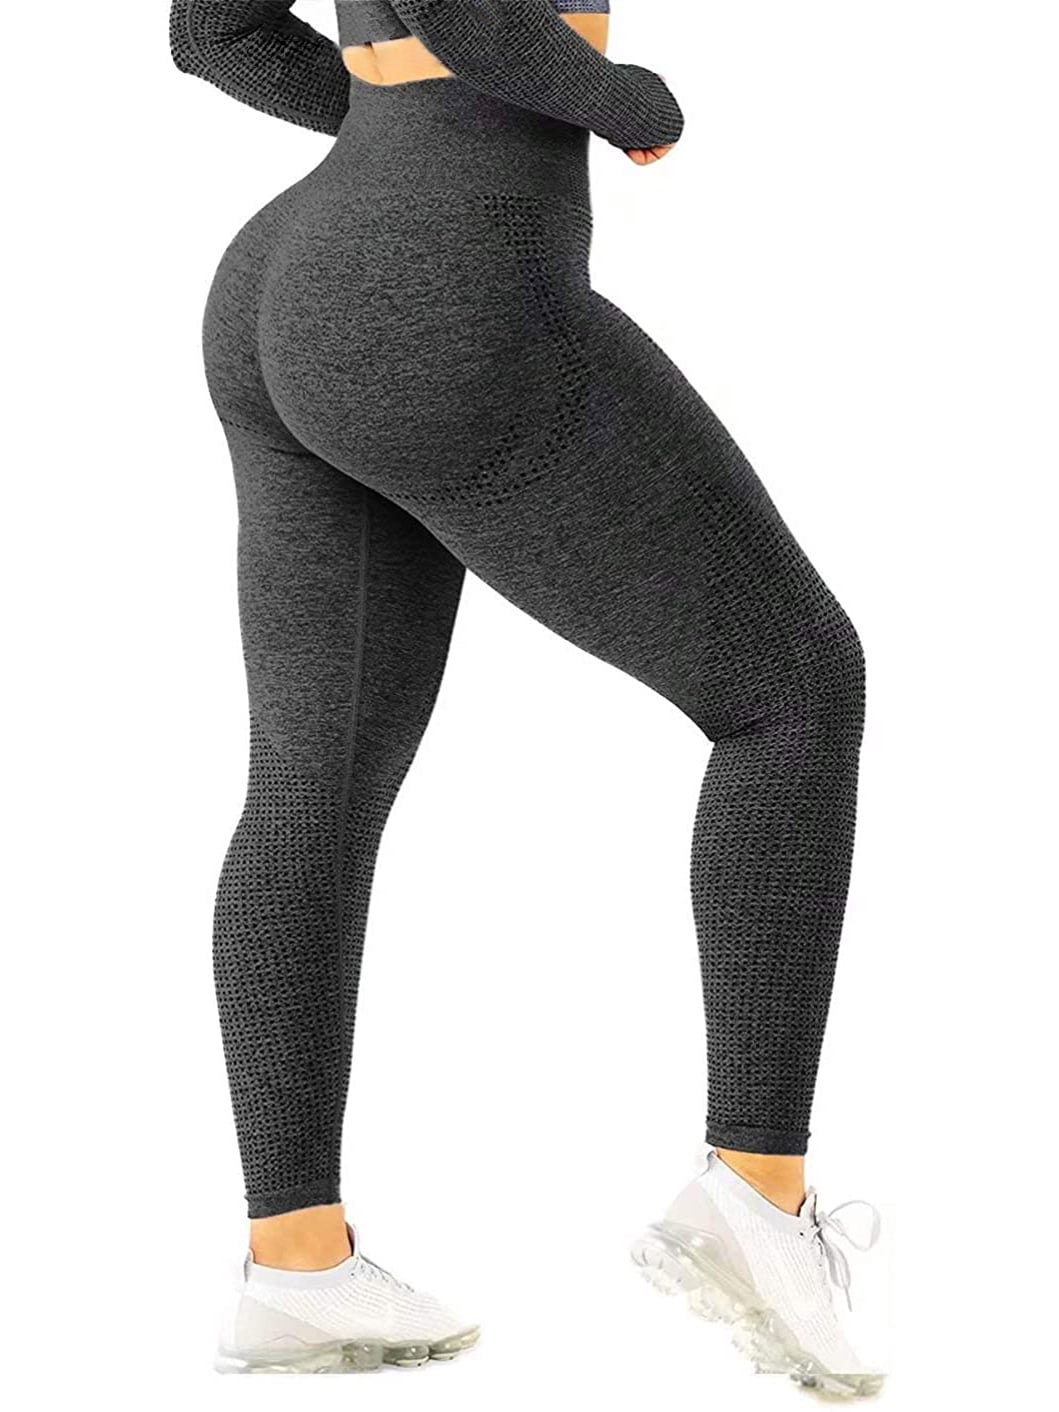 Women's Ruched Yoga Pants Butt Lifting Leggings Printed Sports Gym Trousers O89